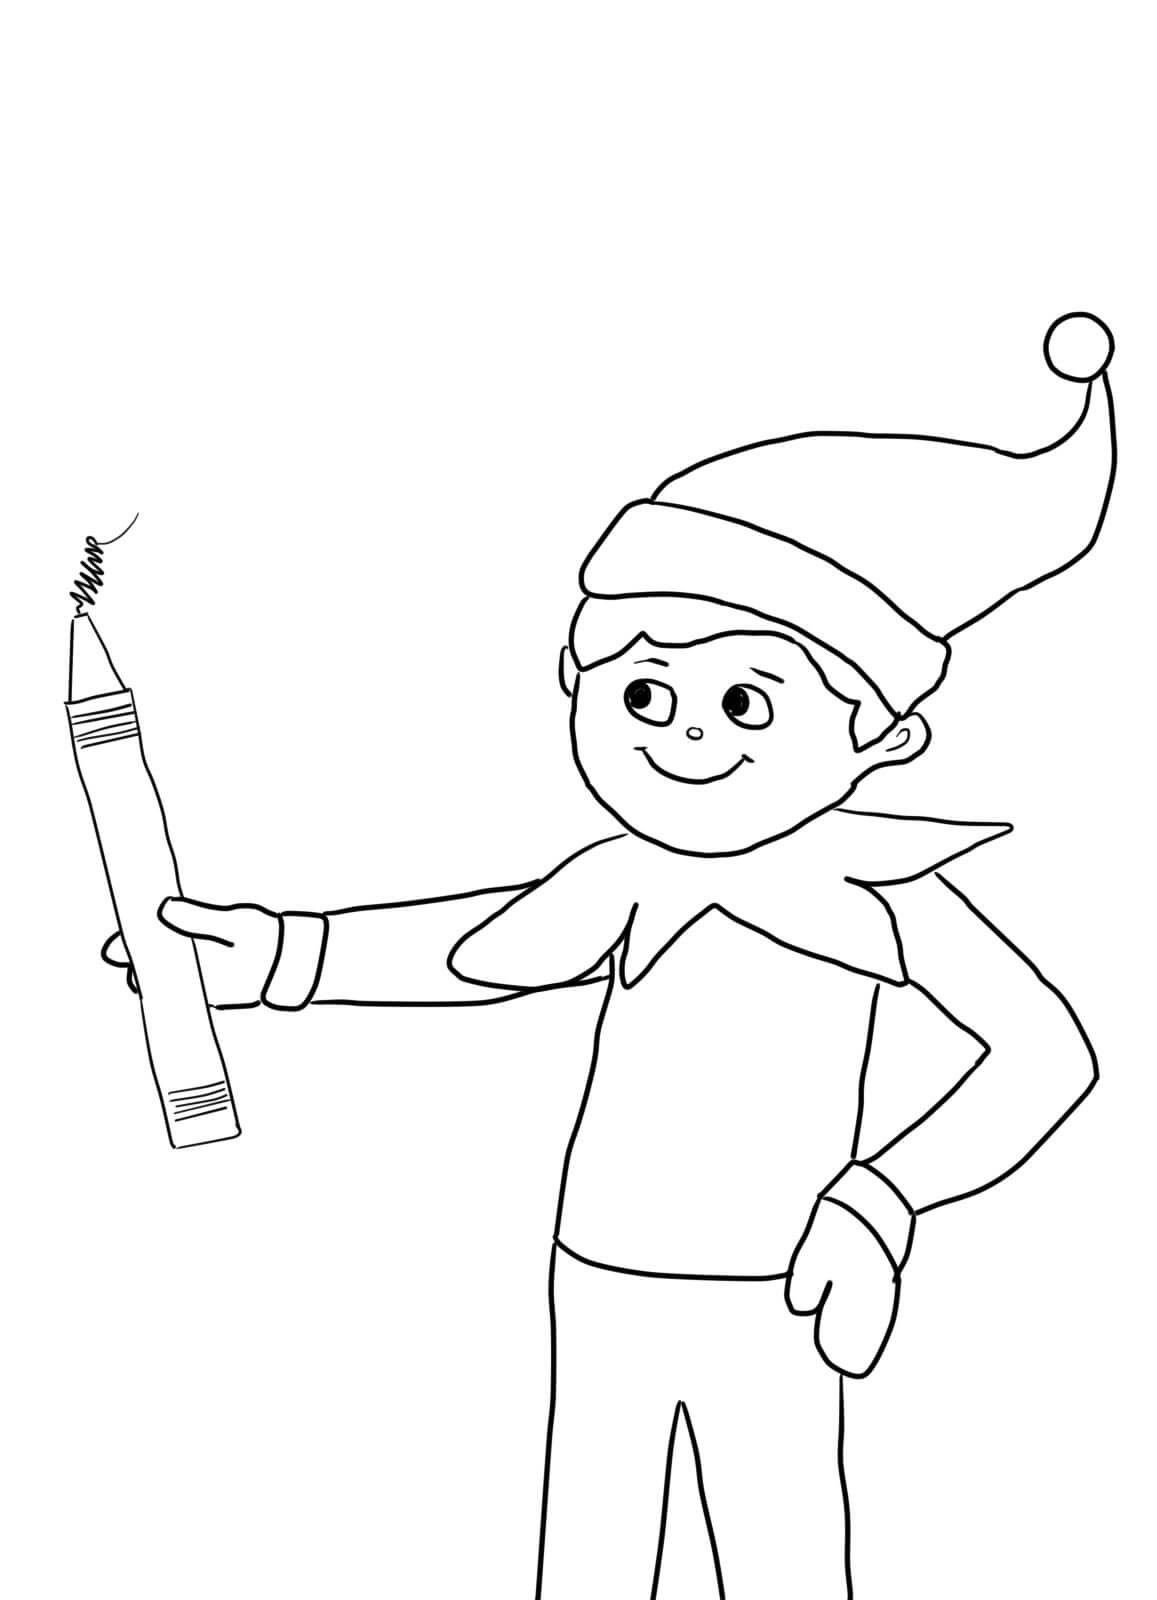 Elf On A Shelf Coloring Pages - Coloring Home